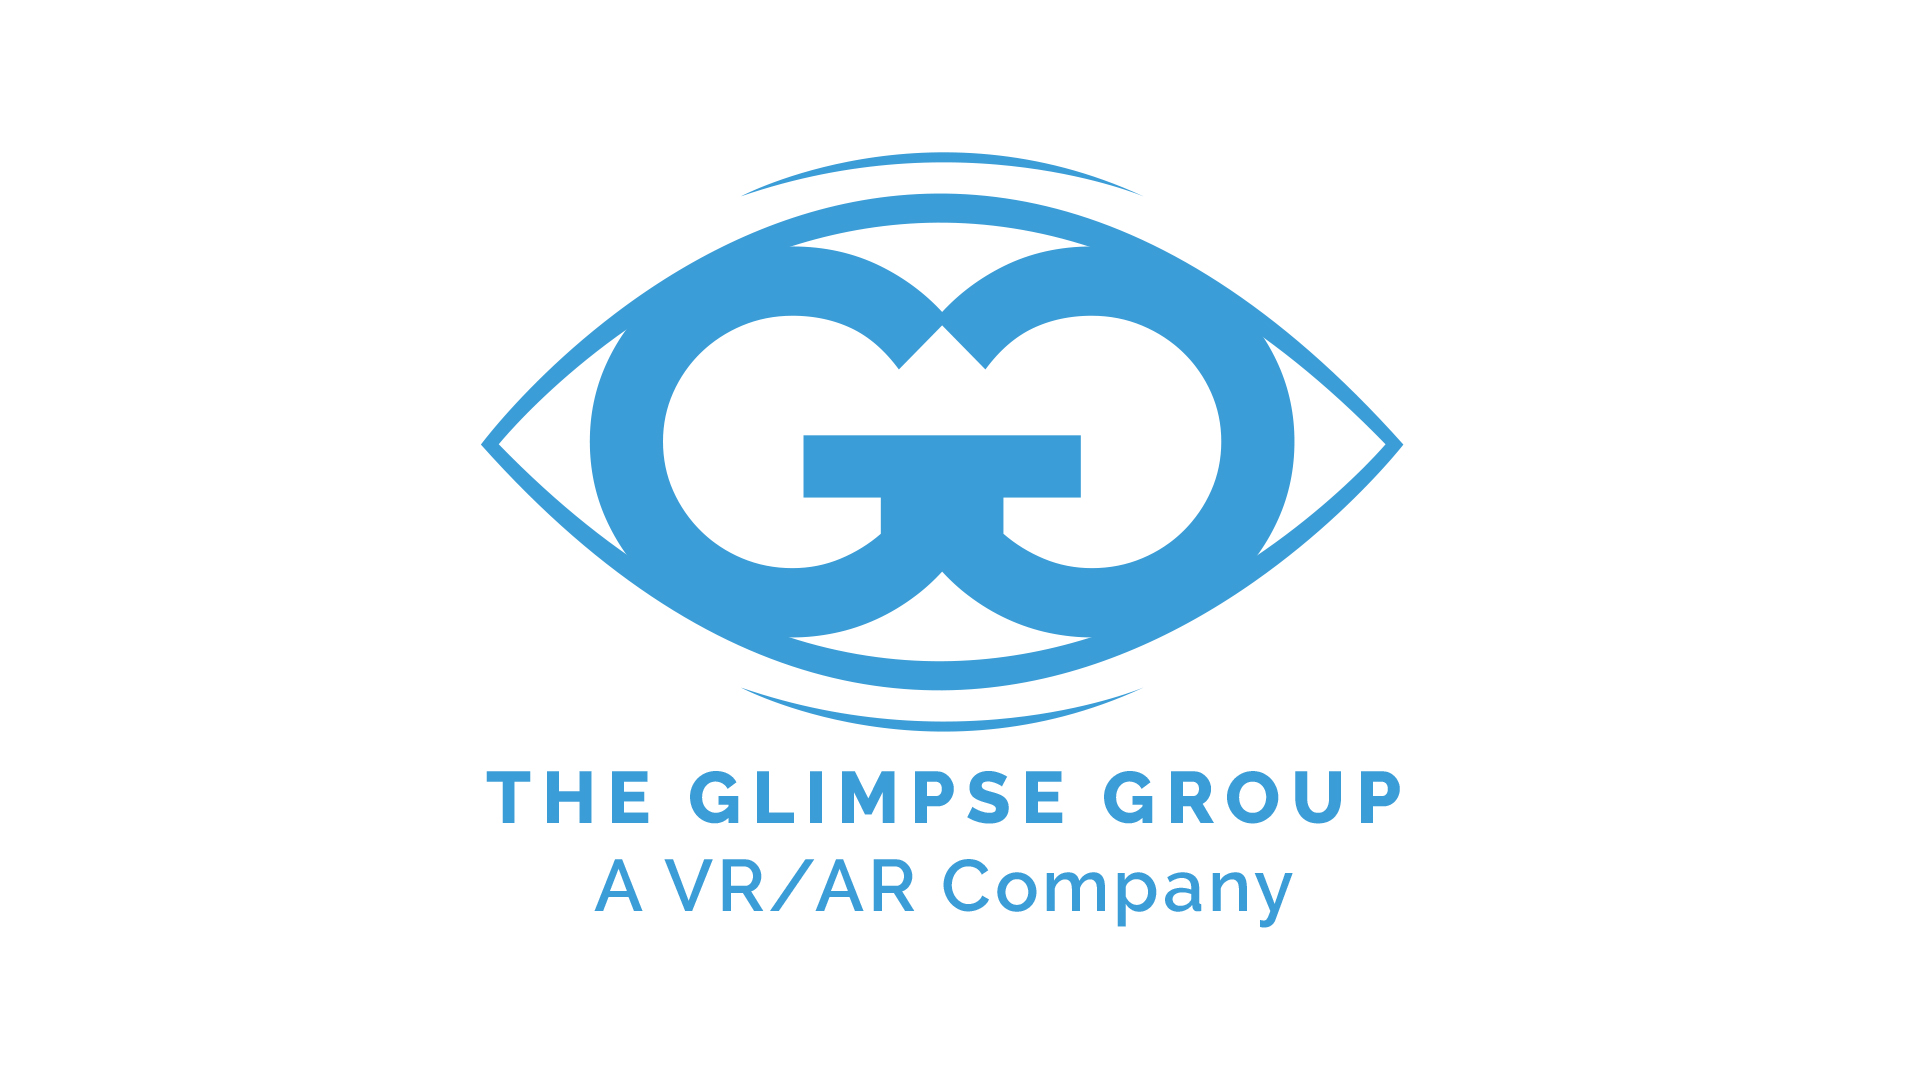 The Glimpse Group Announces the Acquisition of its 10th Subsidiary Company: Auggd, an Augmented Reality Software and Services Company, and the Establishment of Glimpse Australia